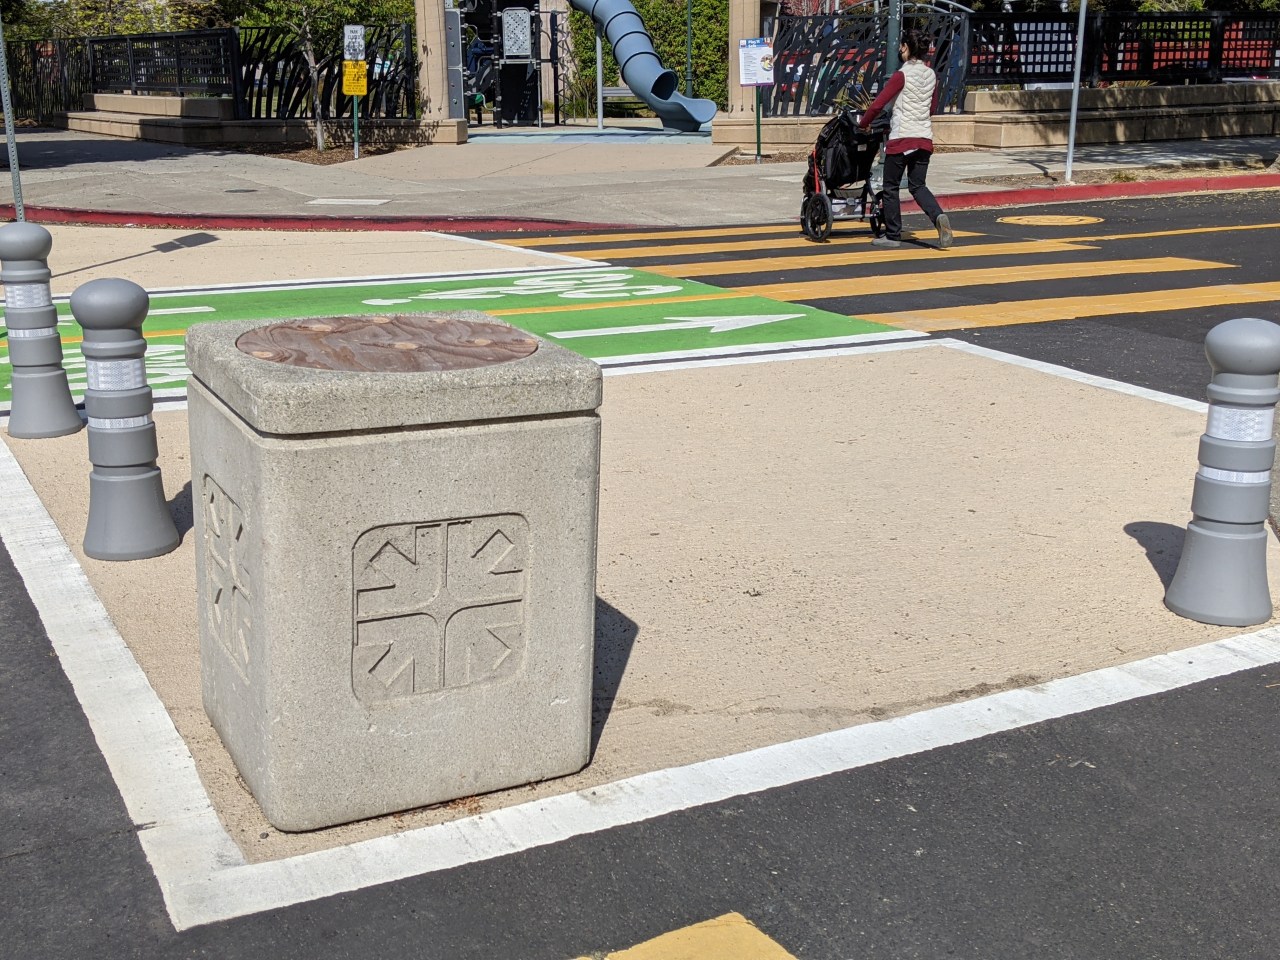 Emeryville shows the way, preventing people from parking on a corner on Doyle Street with a combo of concrete trash cans and plastic posts painted to look like concrete. Photo: Streetsblog/Rudick